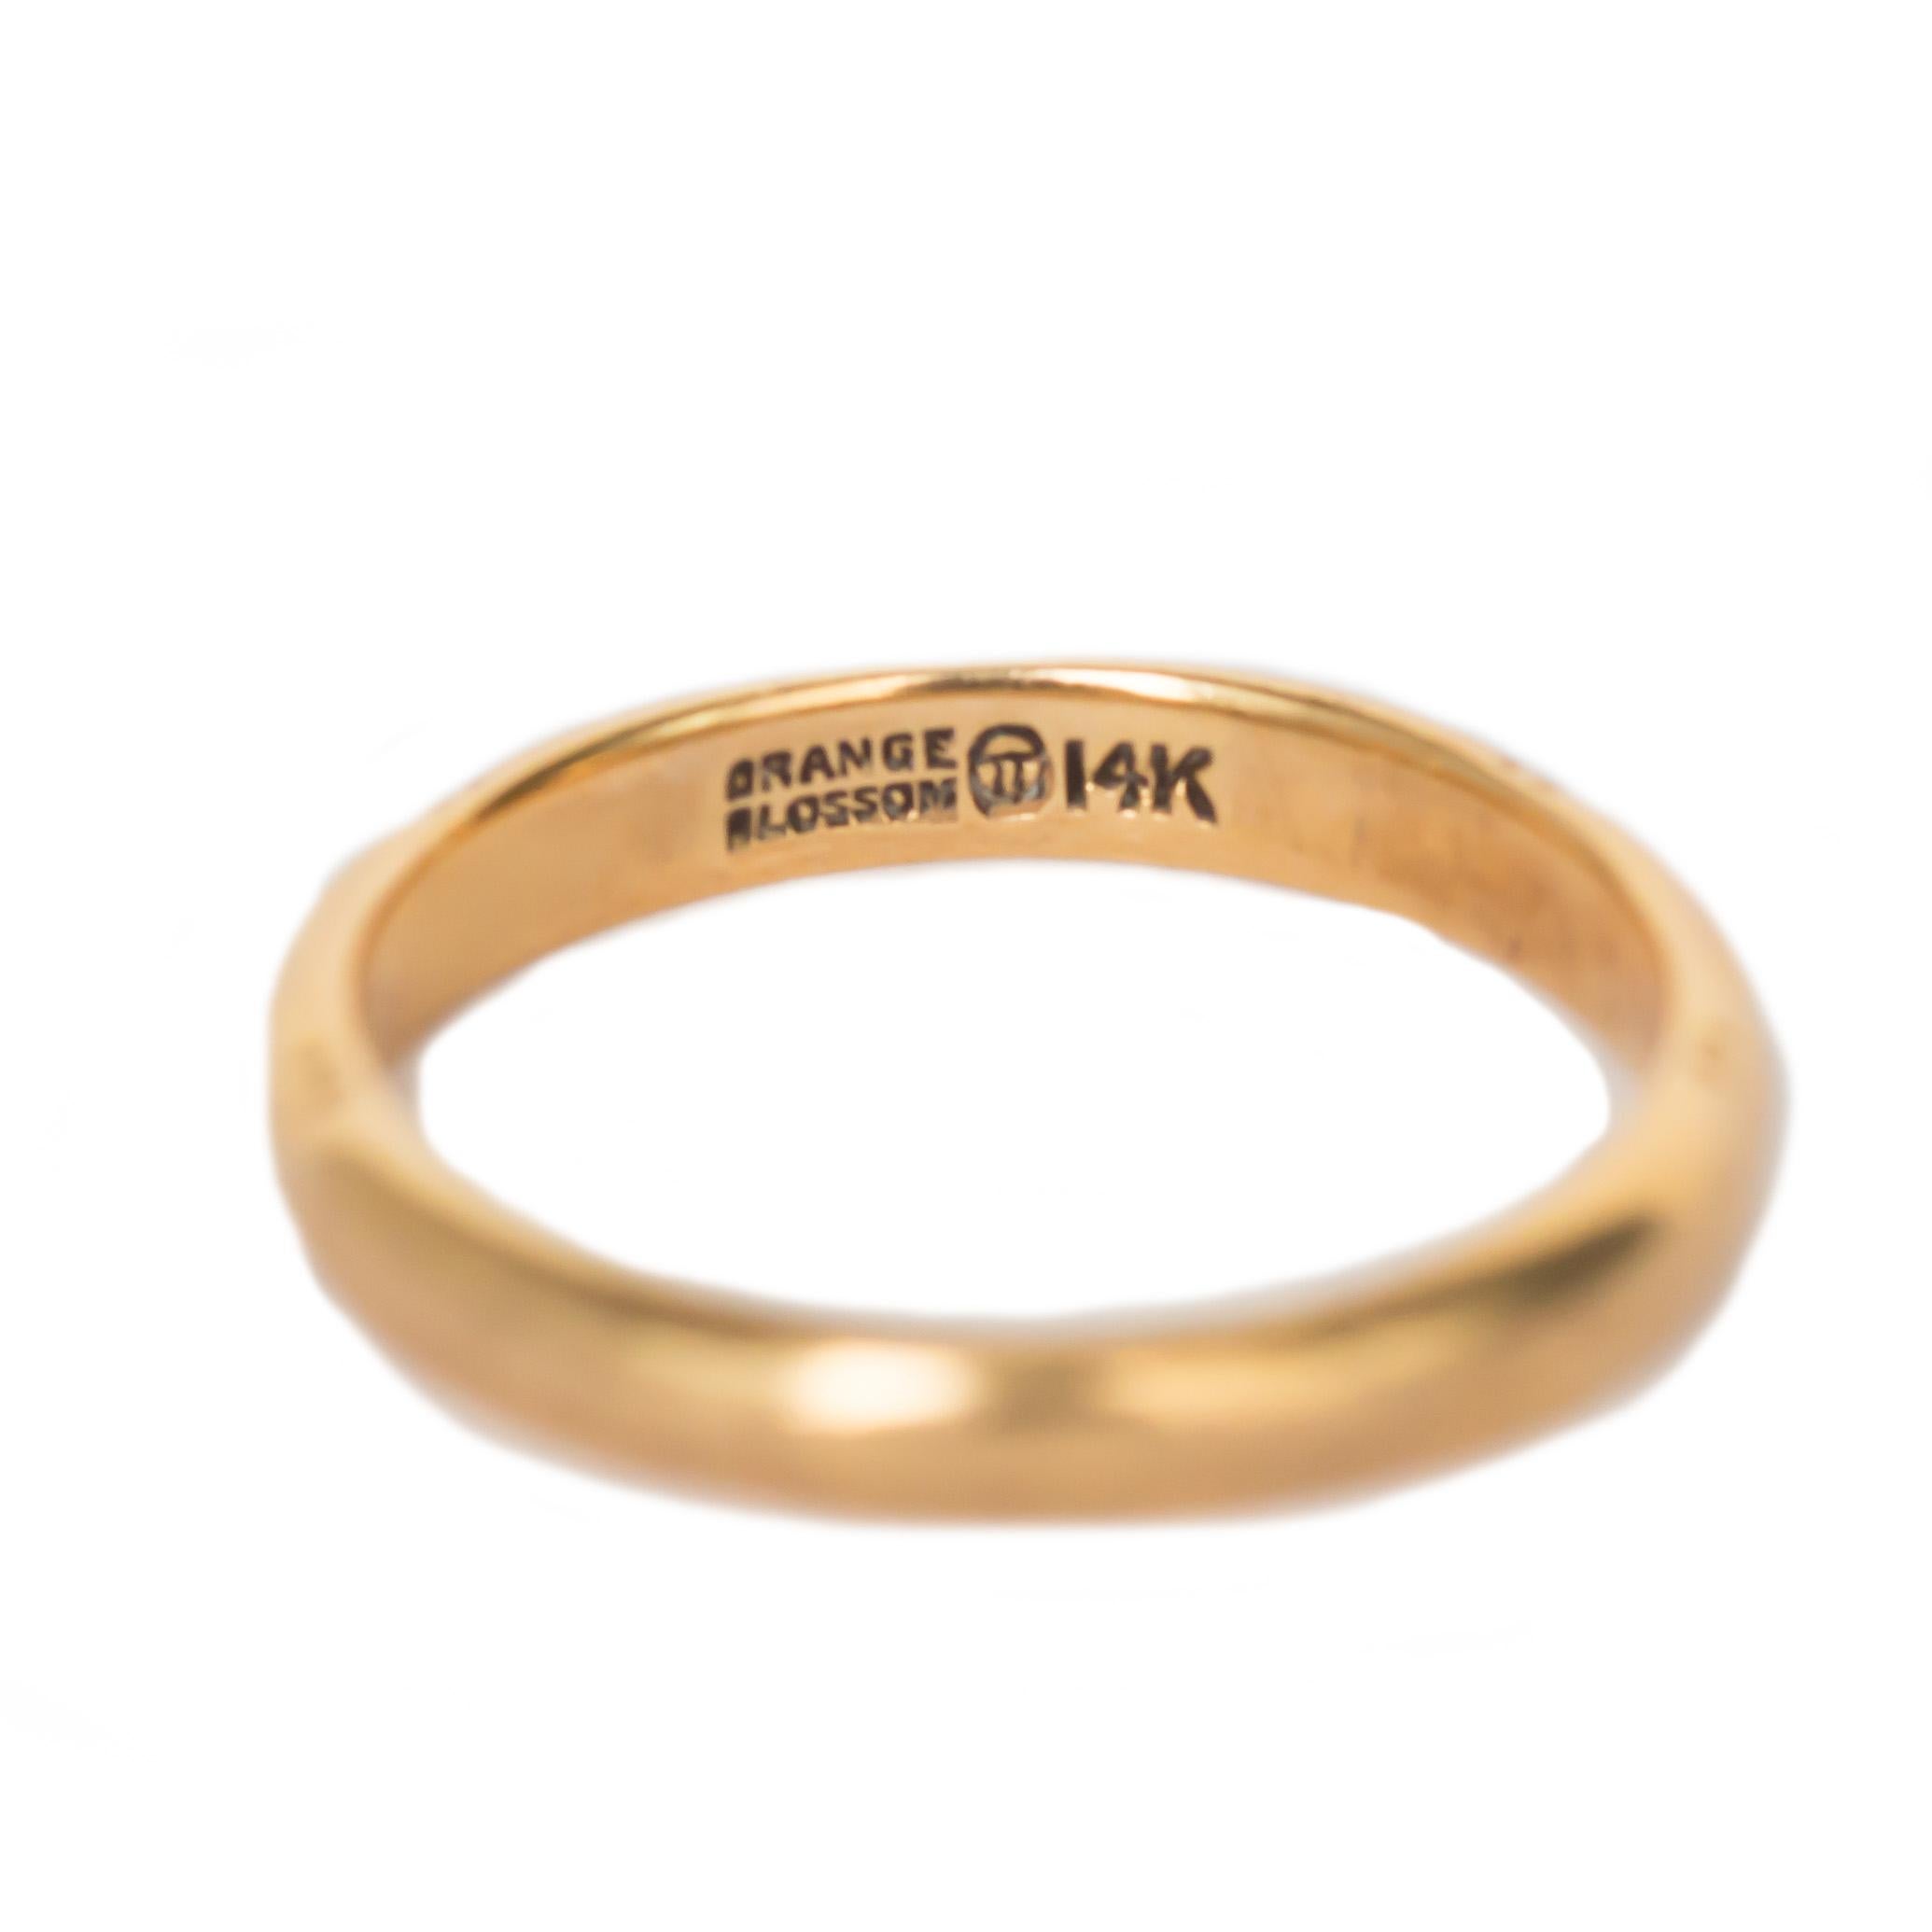 Ring Size: 8
Metal Type: 14 karat Yellow Gold 
Weight: 3.6 grams

Finger to Top of Stone Measurement: 1.78mm
Width: 3.16mm